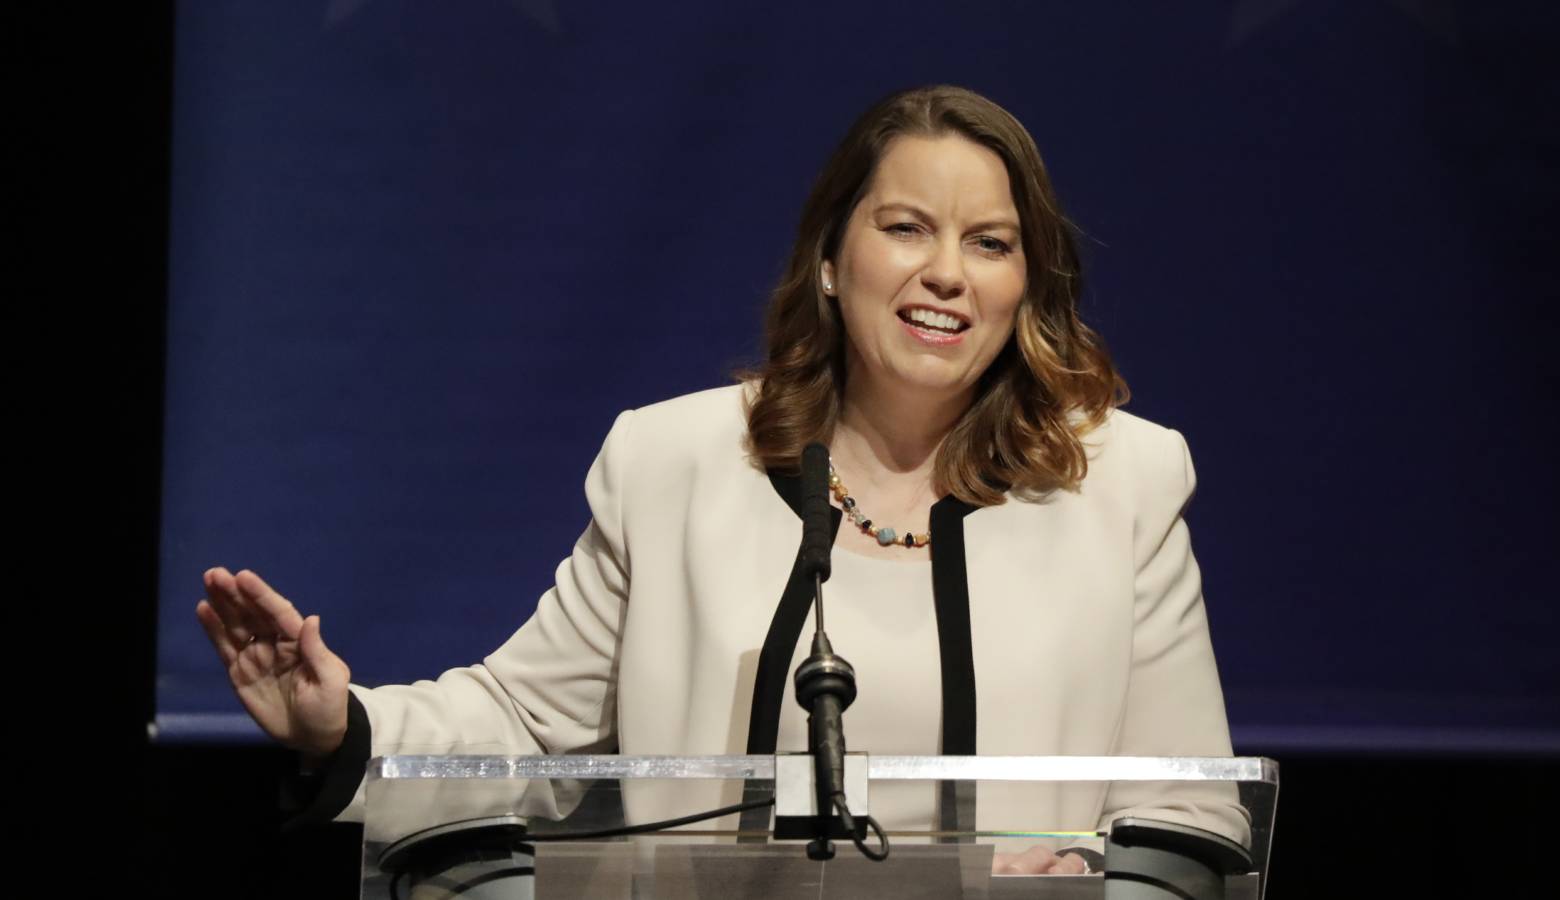 Libertarian candidate Lucy Brenton relishes the chance to play the spoiler in Indiana’s crucial U.S. Senate race. (Courtesy of Indiana Debate Commission, Darron Cummings/AP)